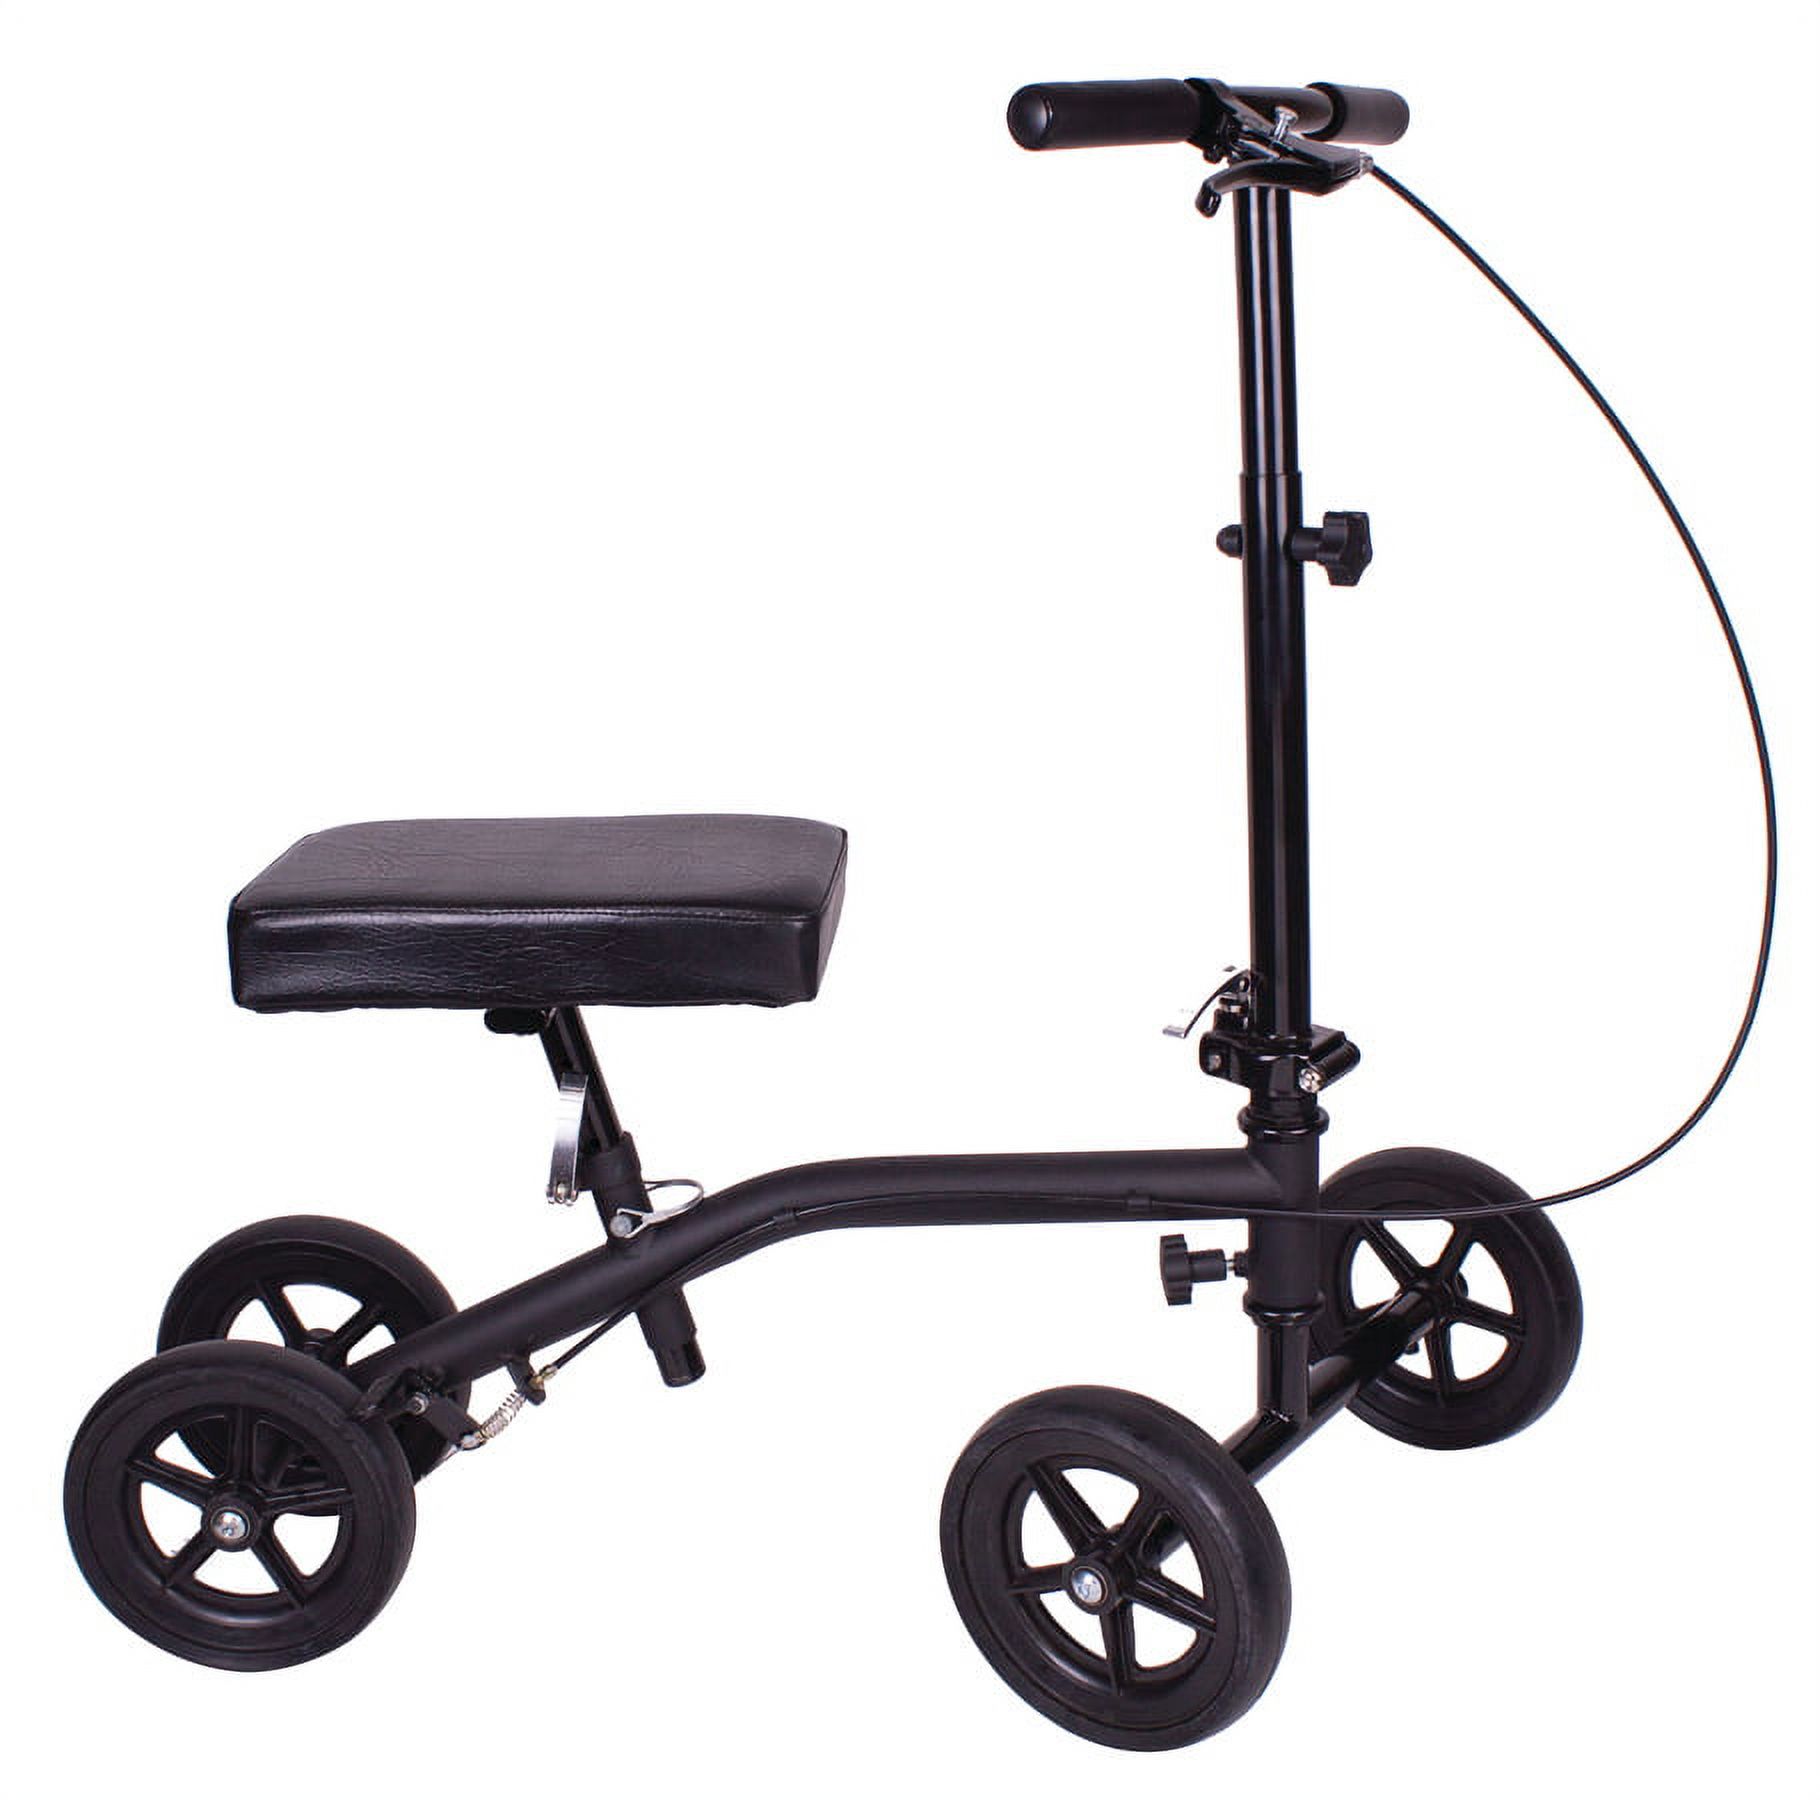 Carex Knee Scooter with Platform Pad, for Adults, Seniors, and Teens, Black, 250 lb Weight Capacity - image 3 of 3